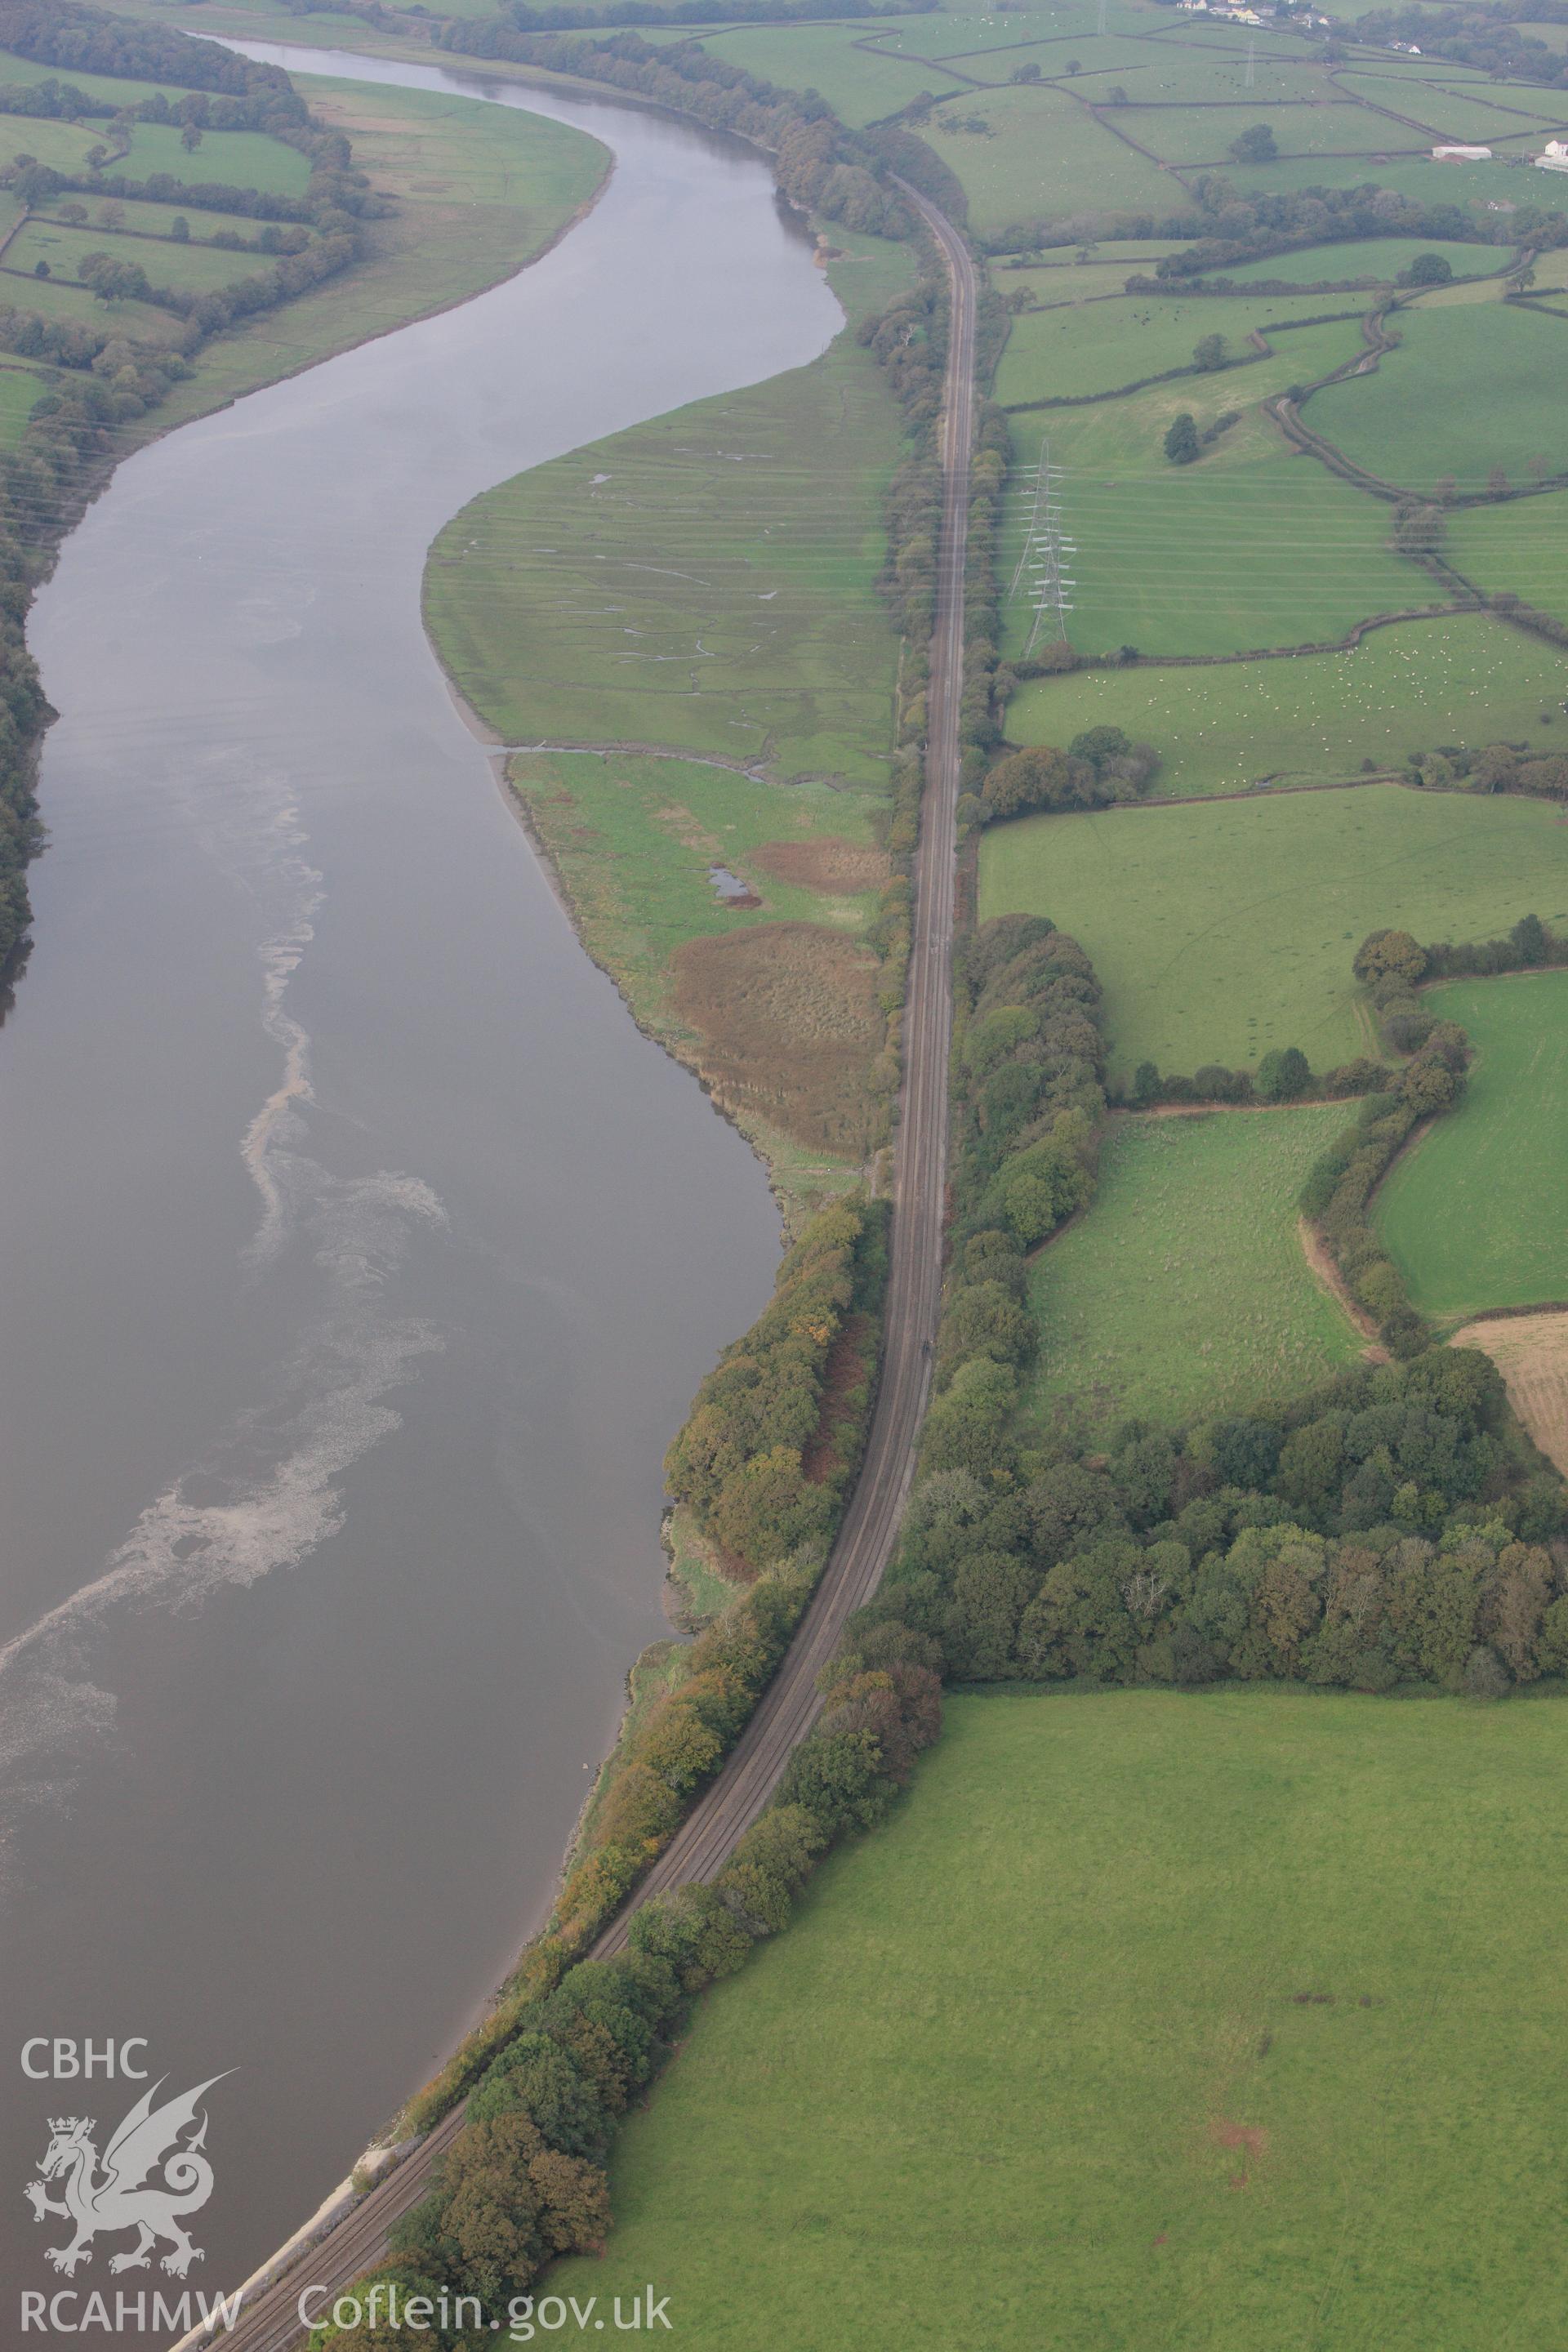 RCAHMW colour oblique aerial photograph of River Towy south of Carmarthen. Taken on 14 October 2009 by Toby Driver